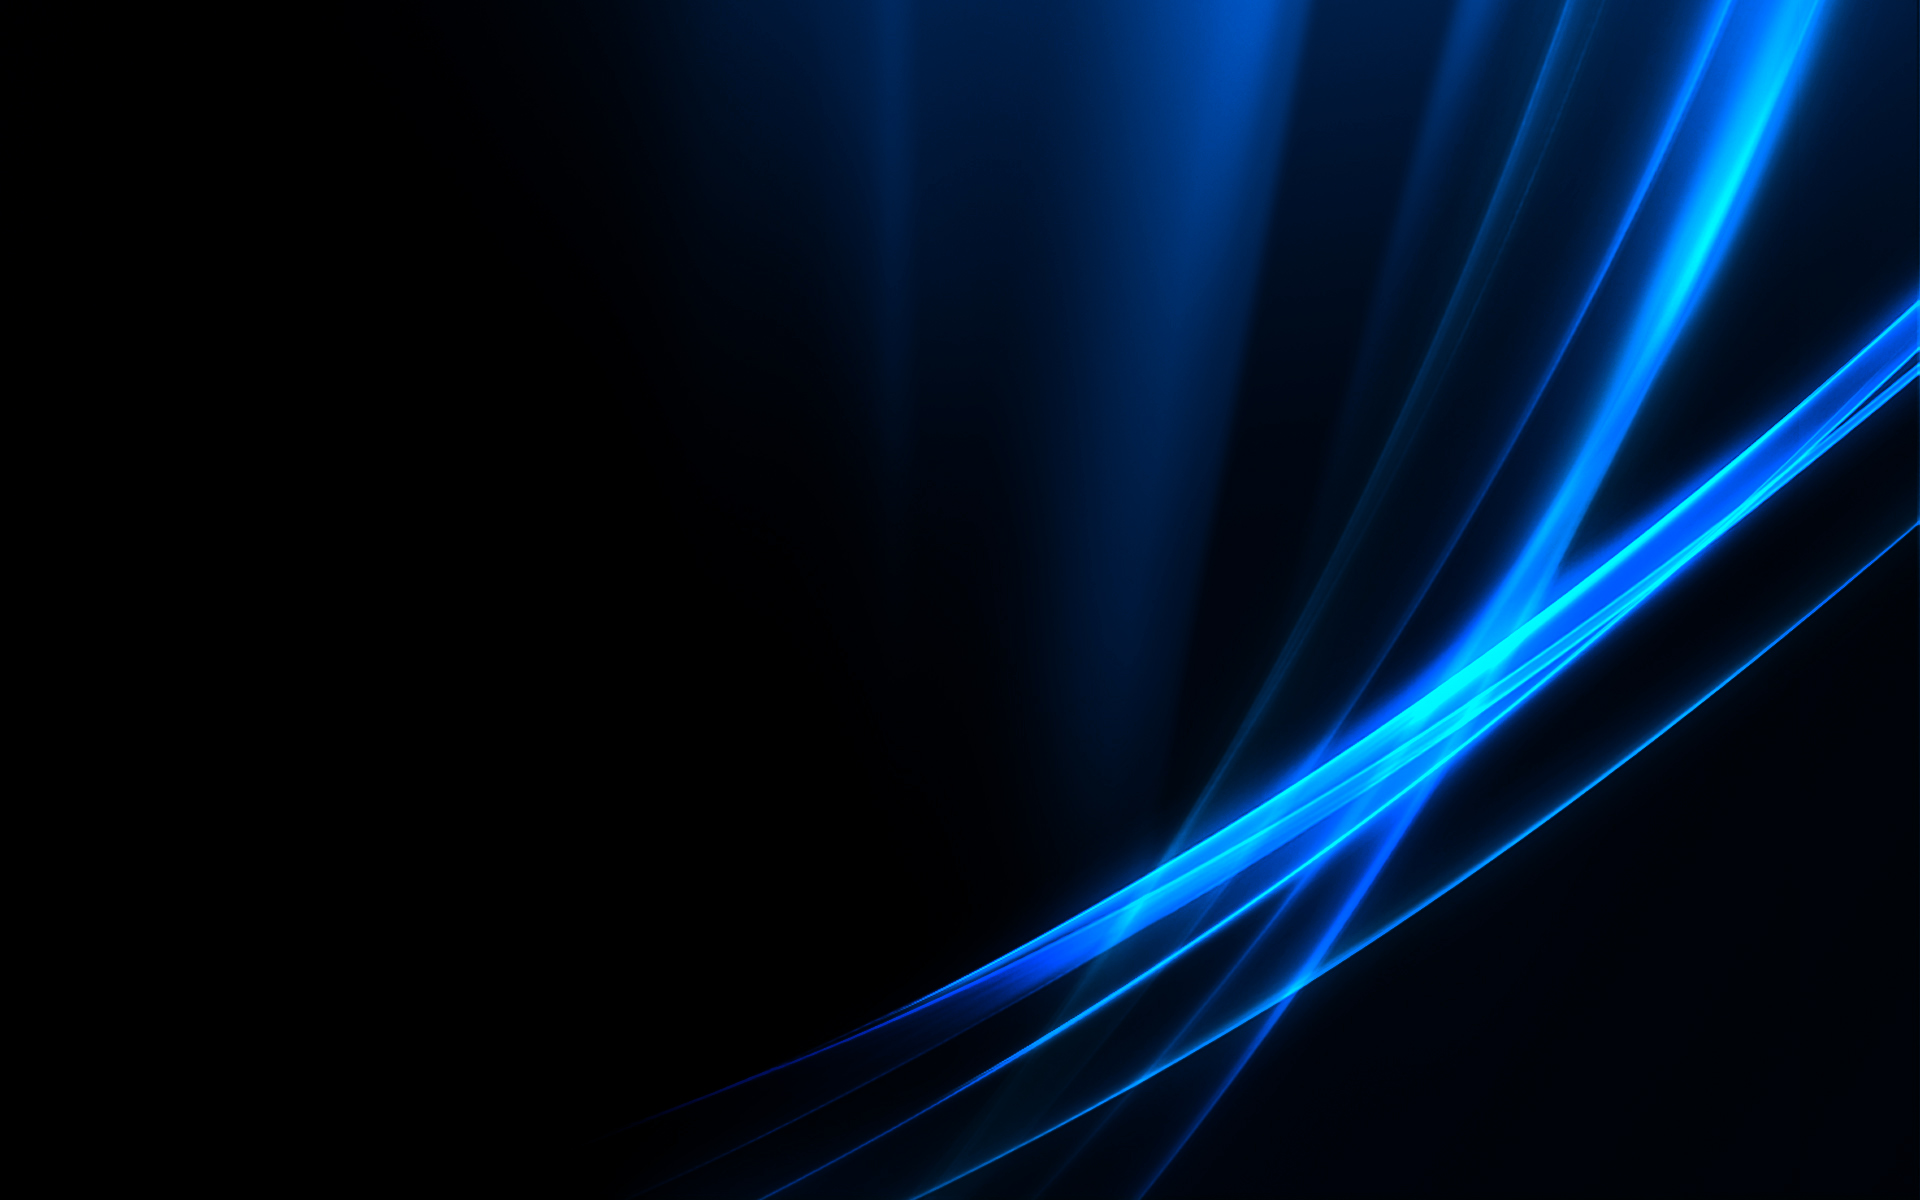 1920 x 1200 Wallpapers Widescreen Wallpapers 12277 abstract bluejpg